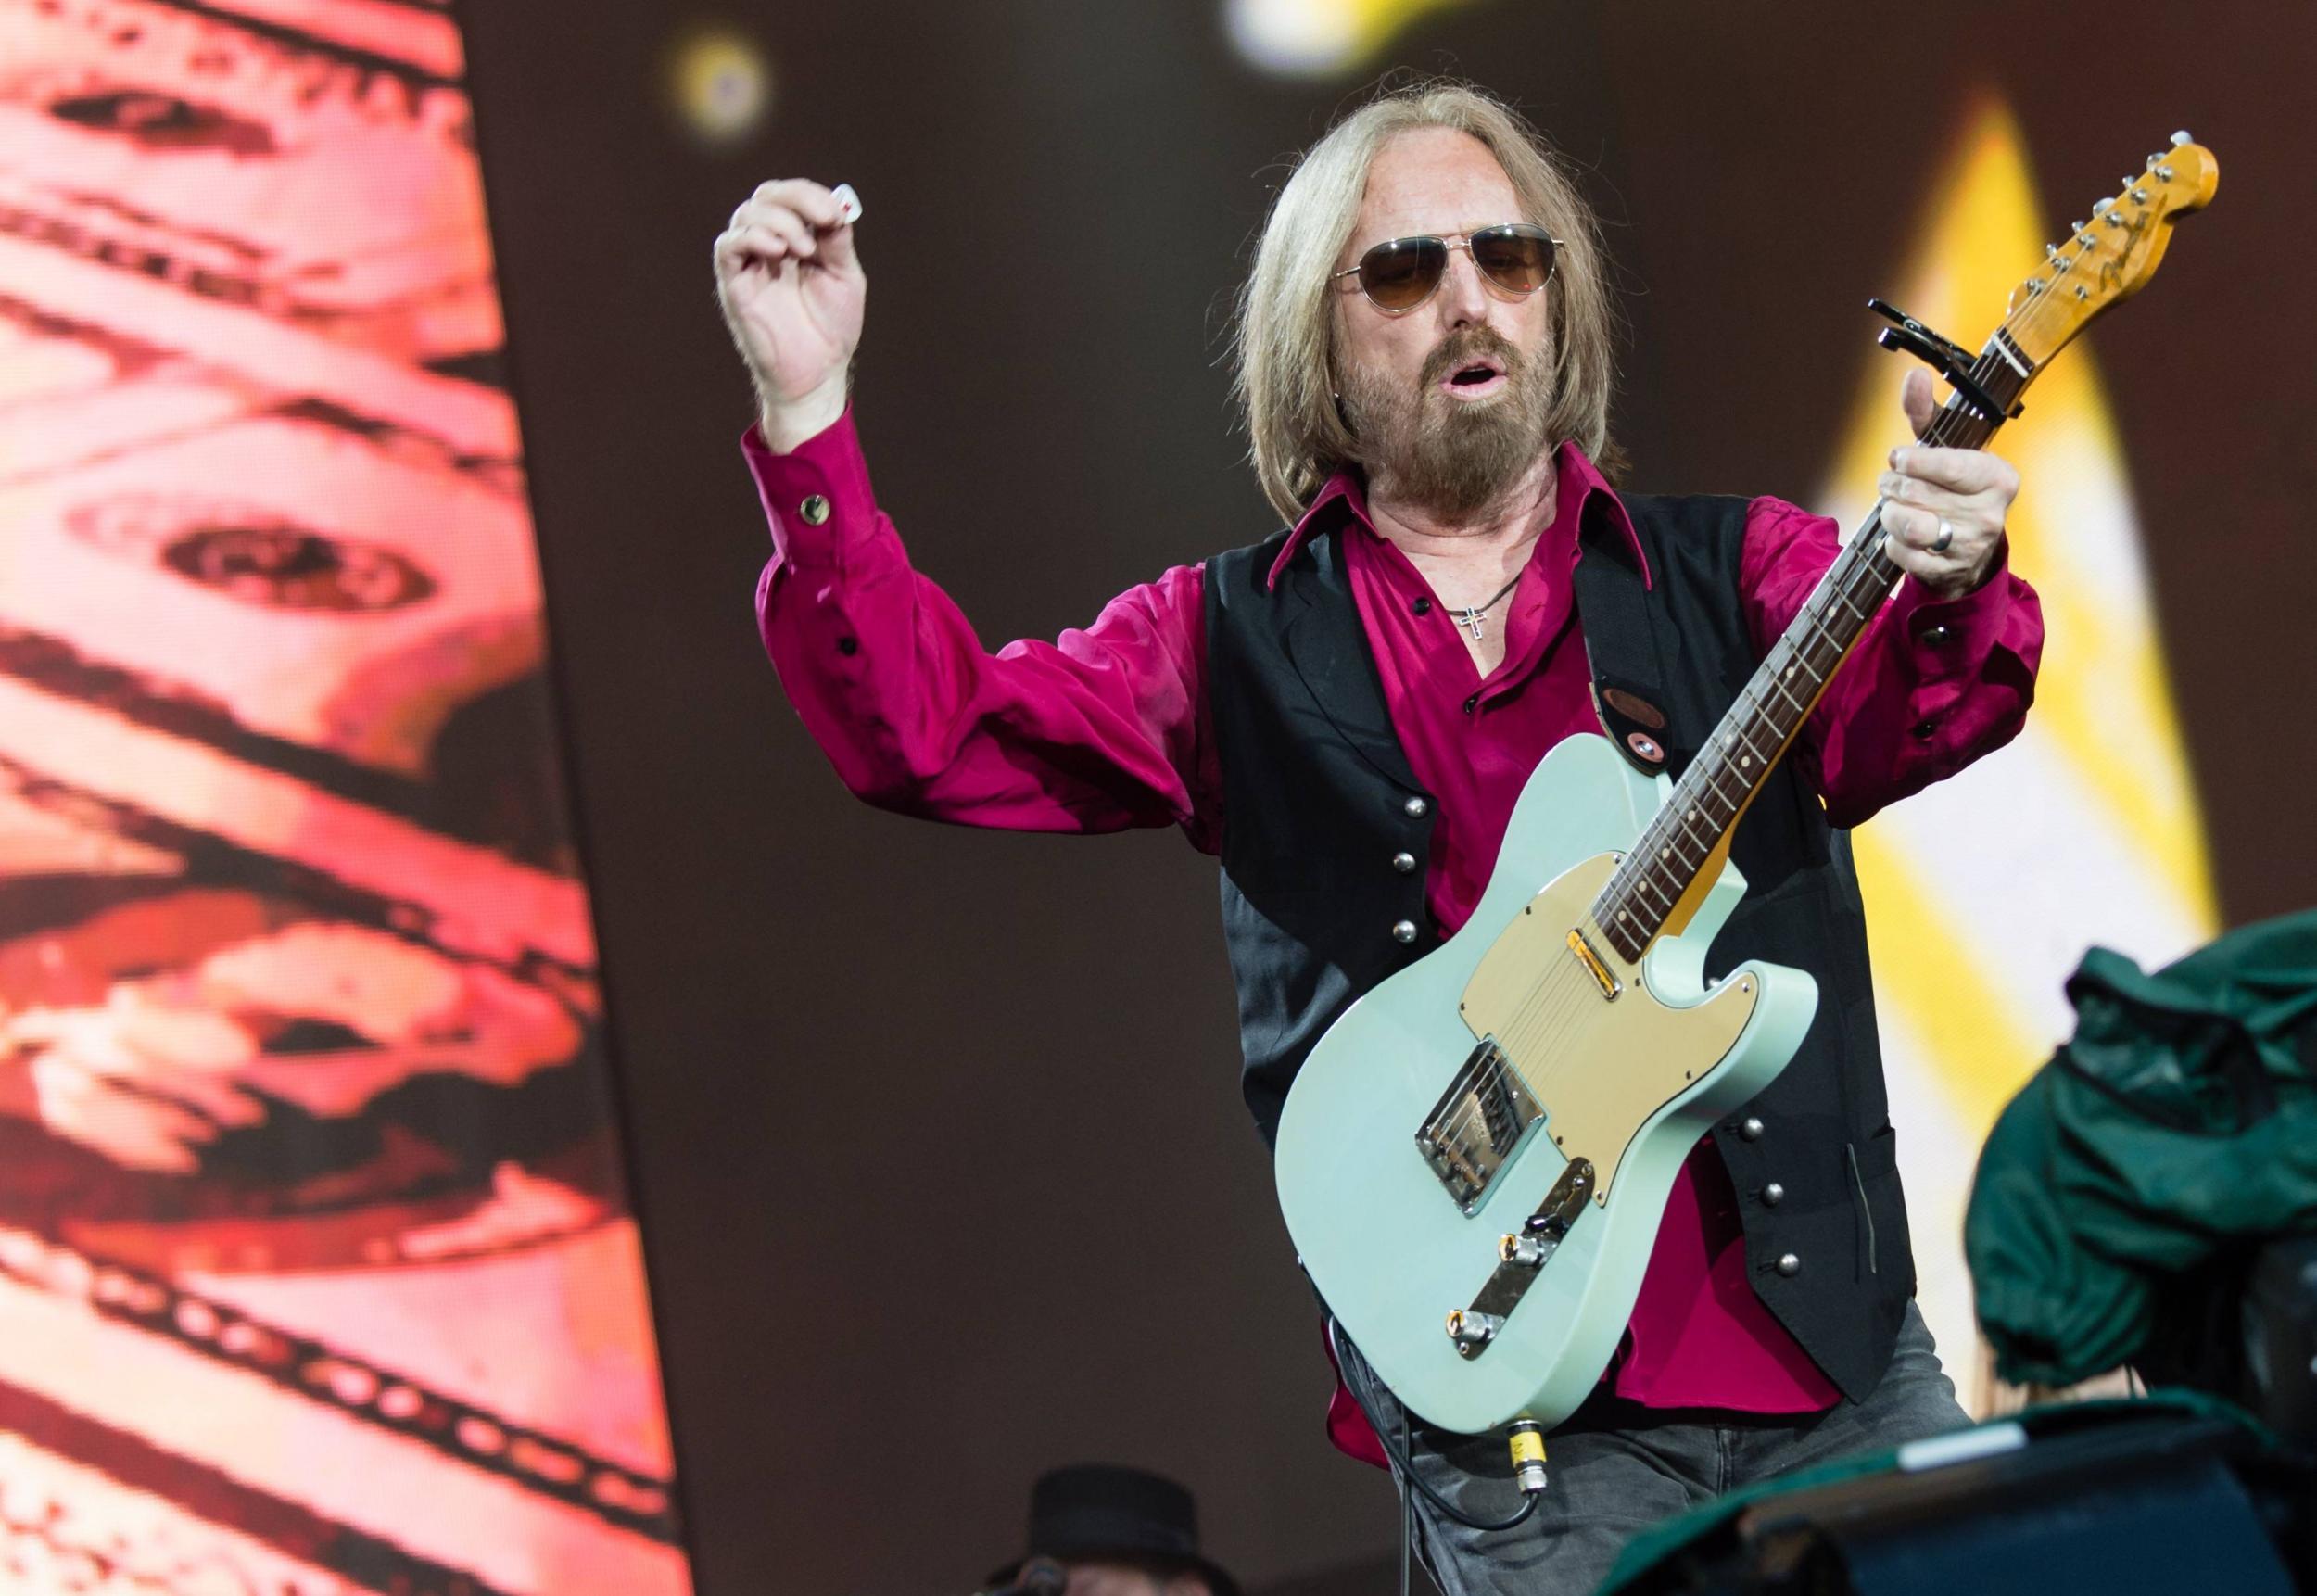 Singer Tom Petty has died at the age of 66